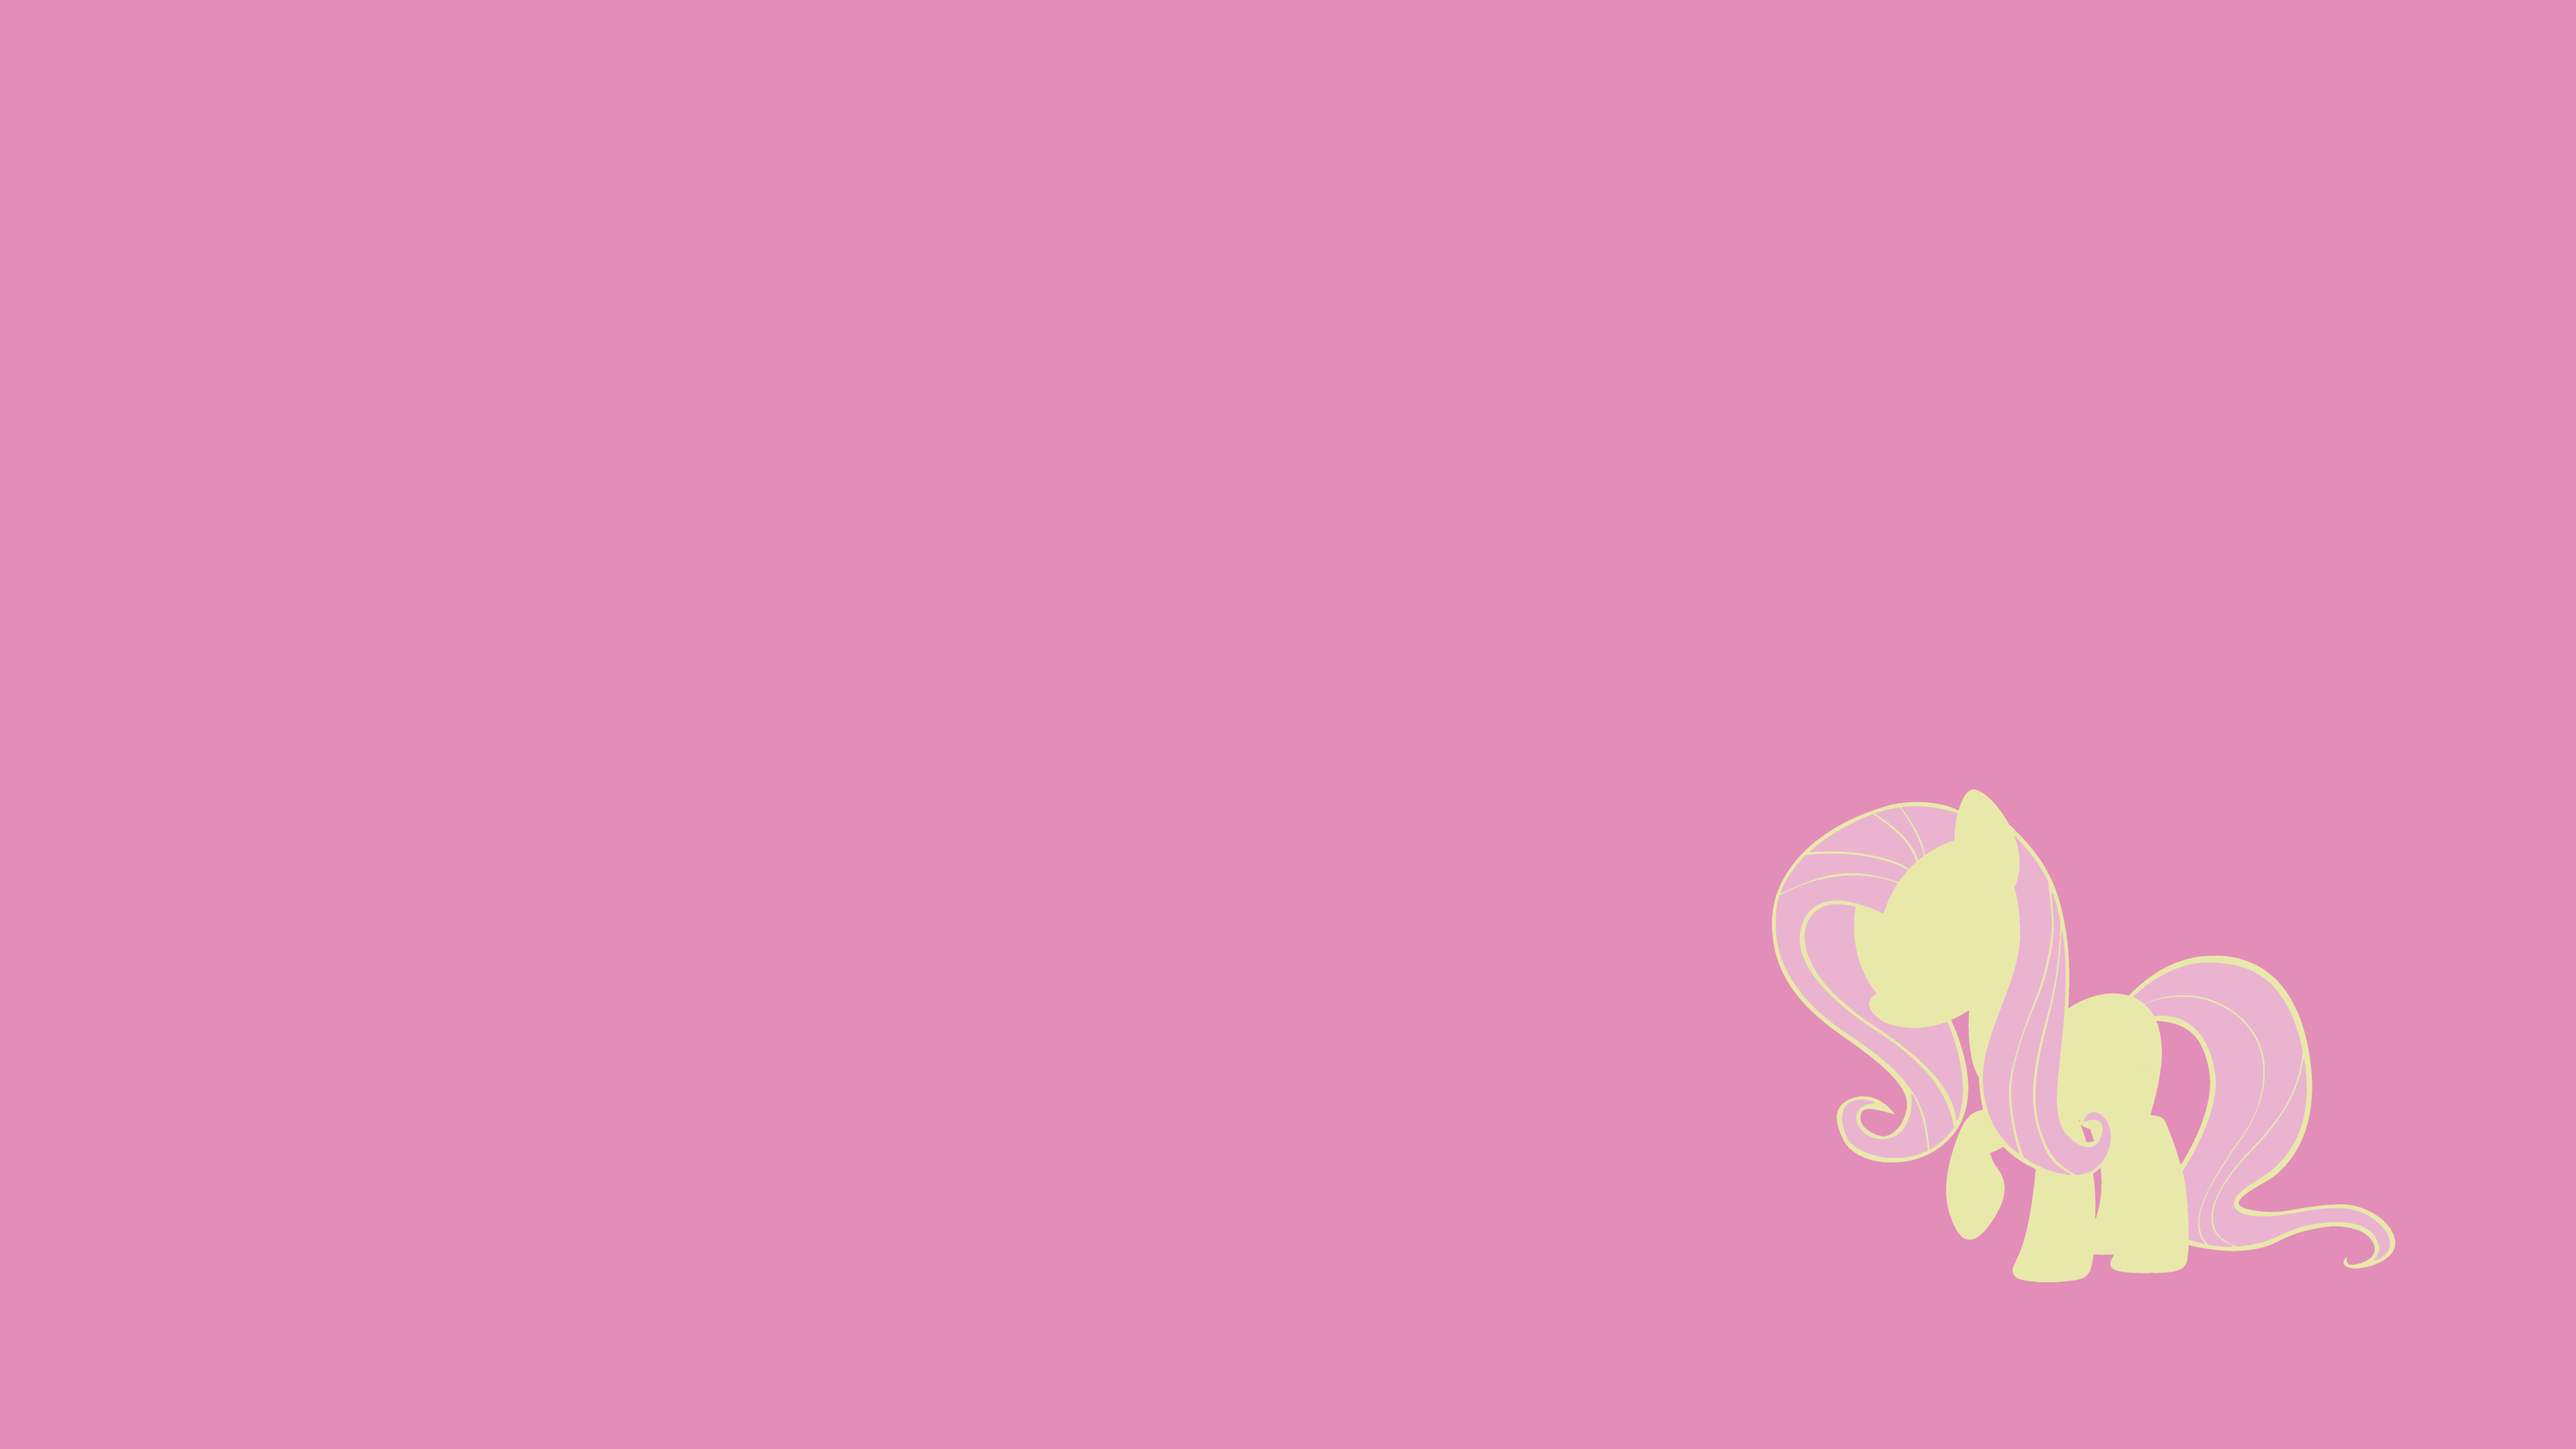 Simple Wallpapers - Fluttershy by DaVca